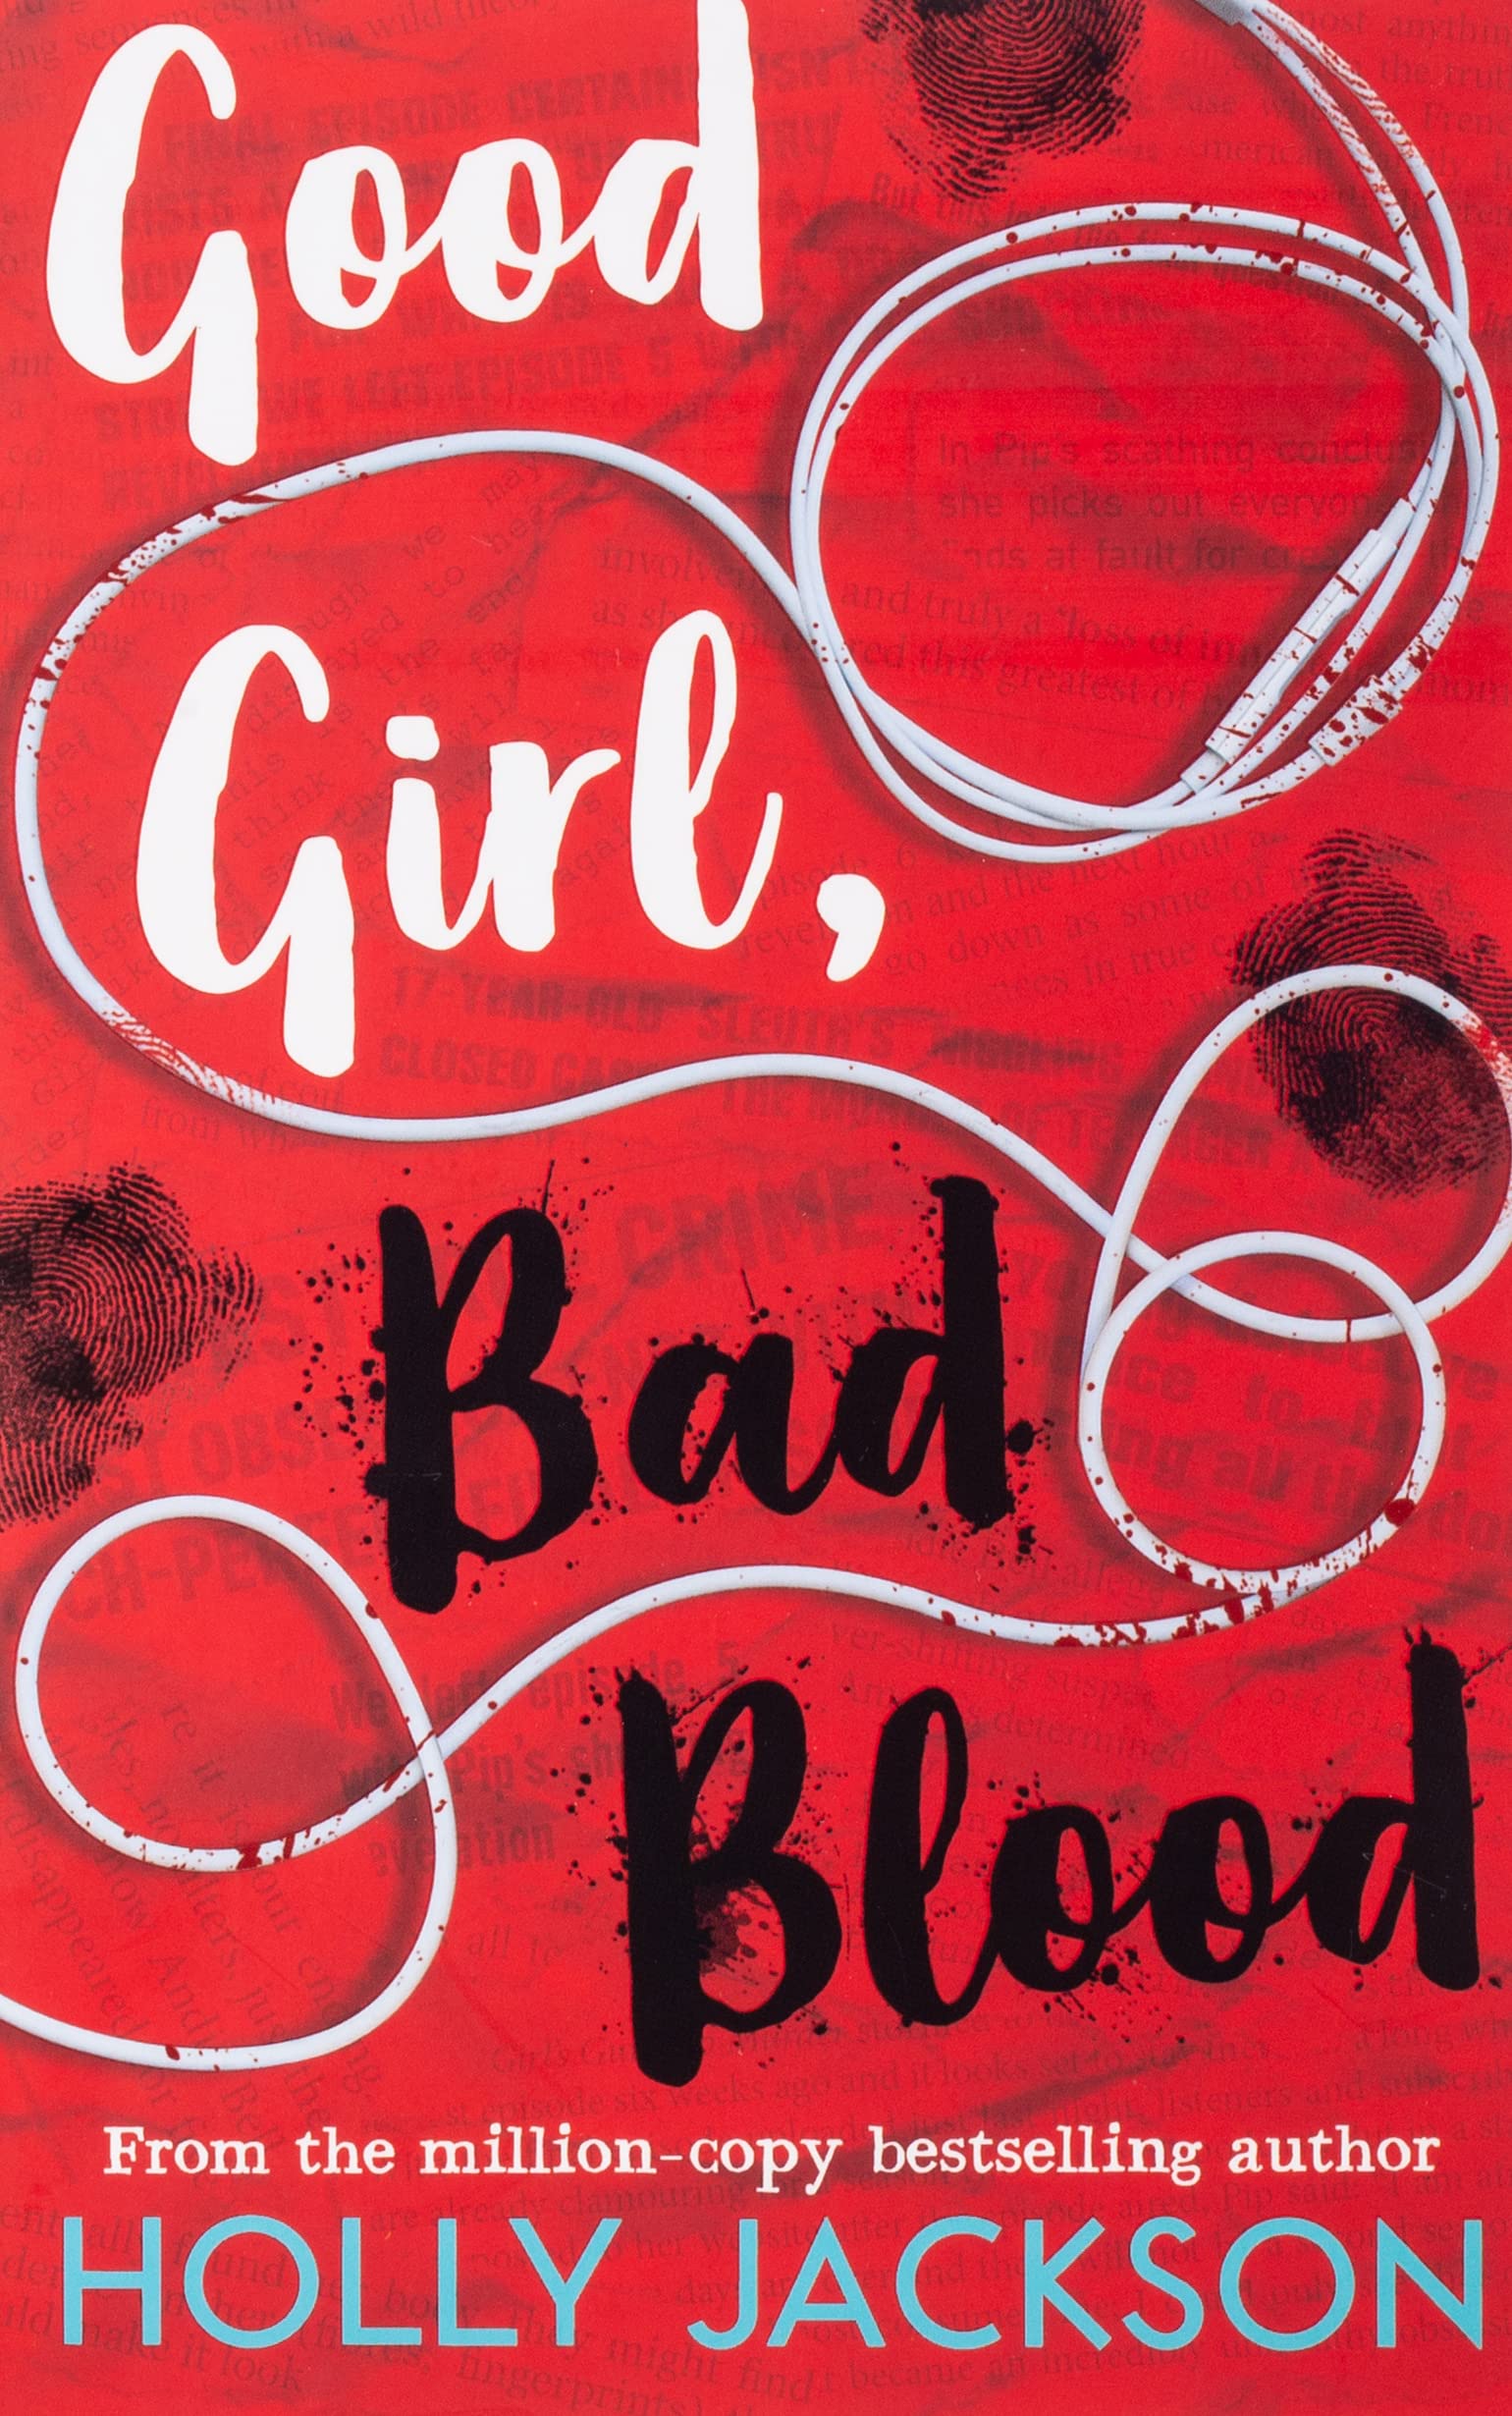 Good Girl, Bad Blood by Holly Jackson Book Review – William J. McGinn